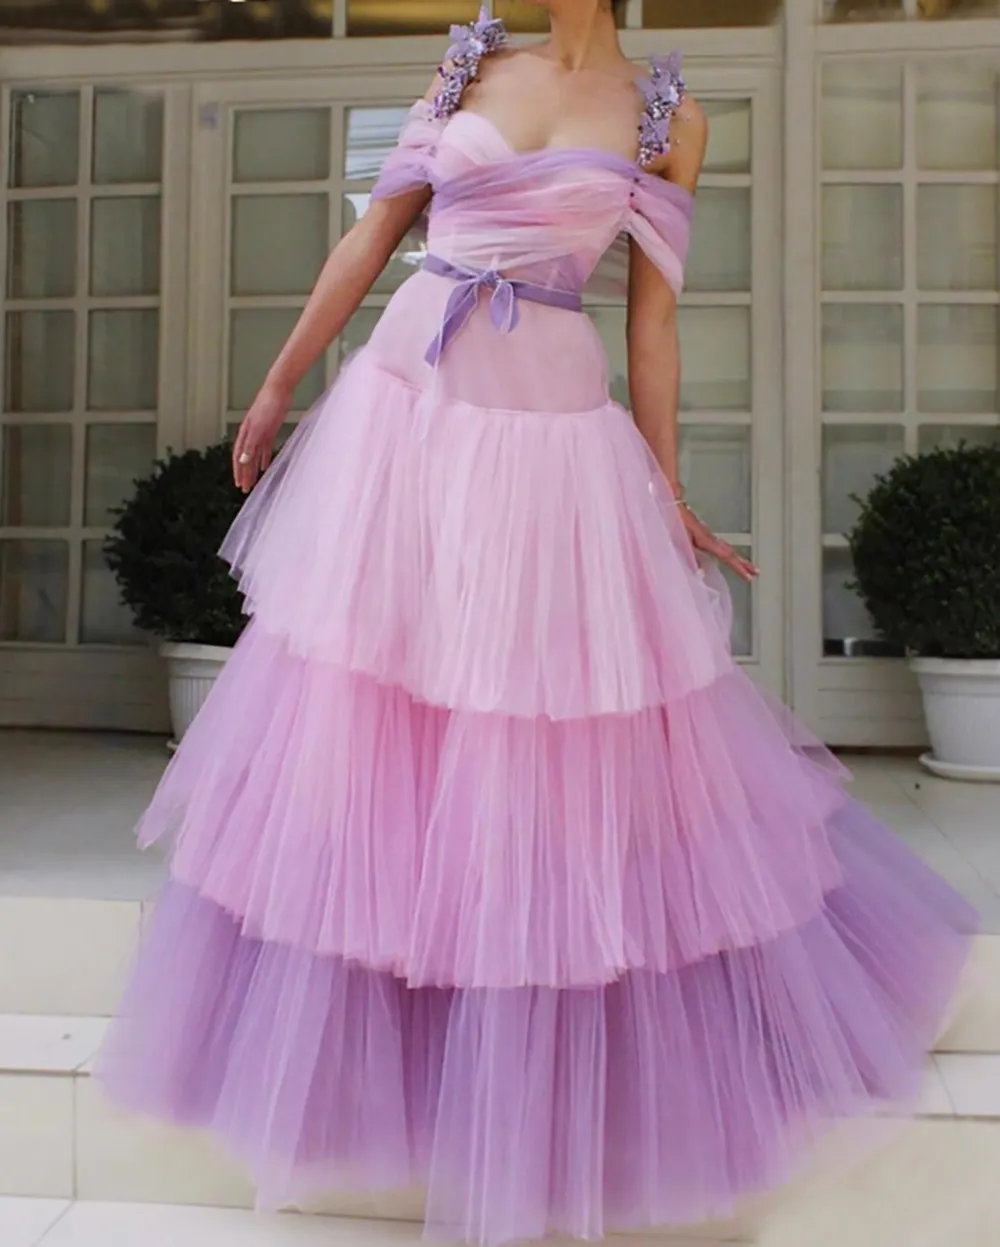 Colorful Prom Dresses Ball Gown Flowers Beaded Straps Party Maxys Long Prom Gown Evening Dresses Robe De Soiree